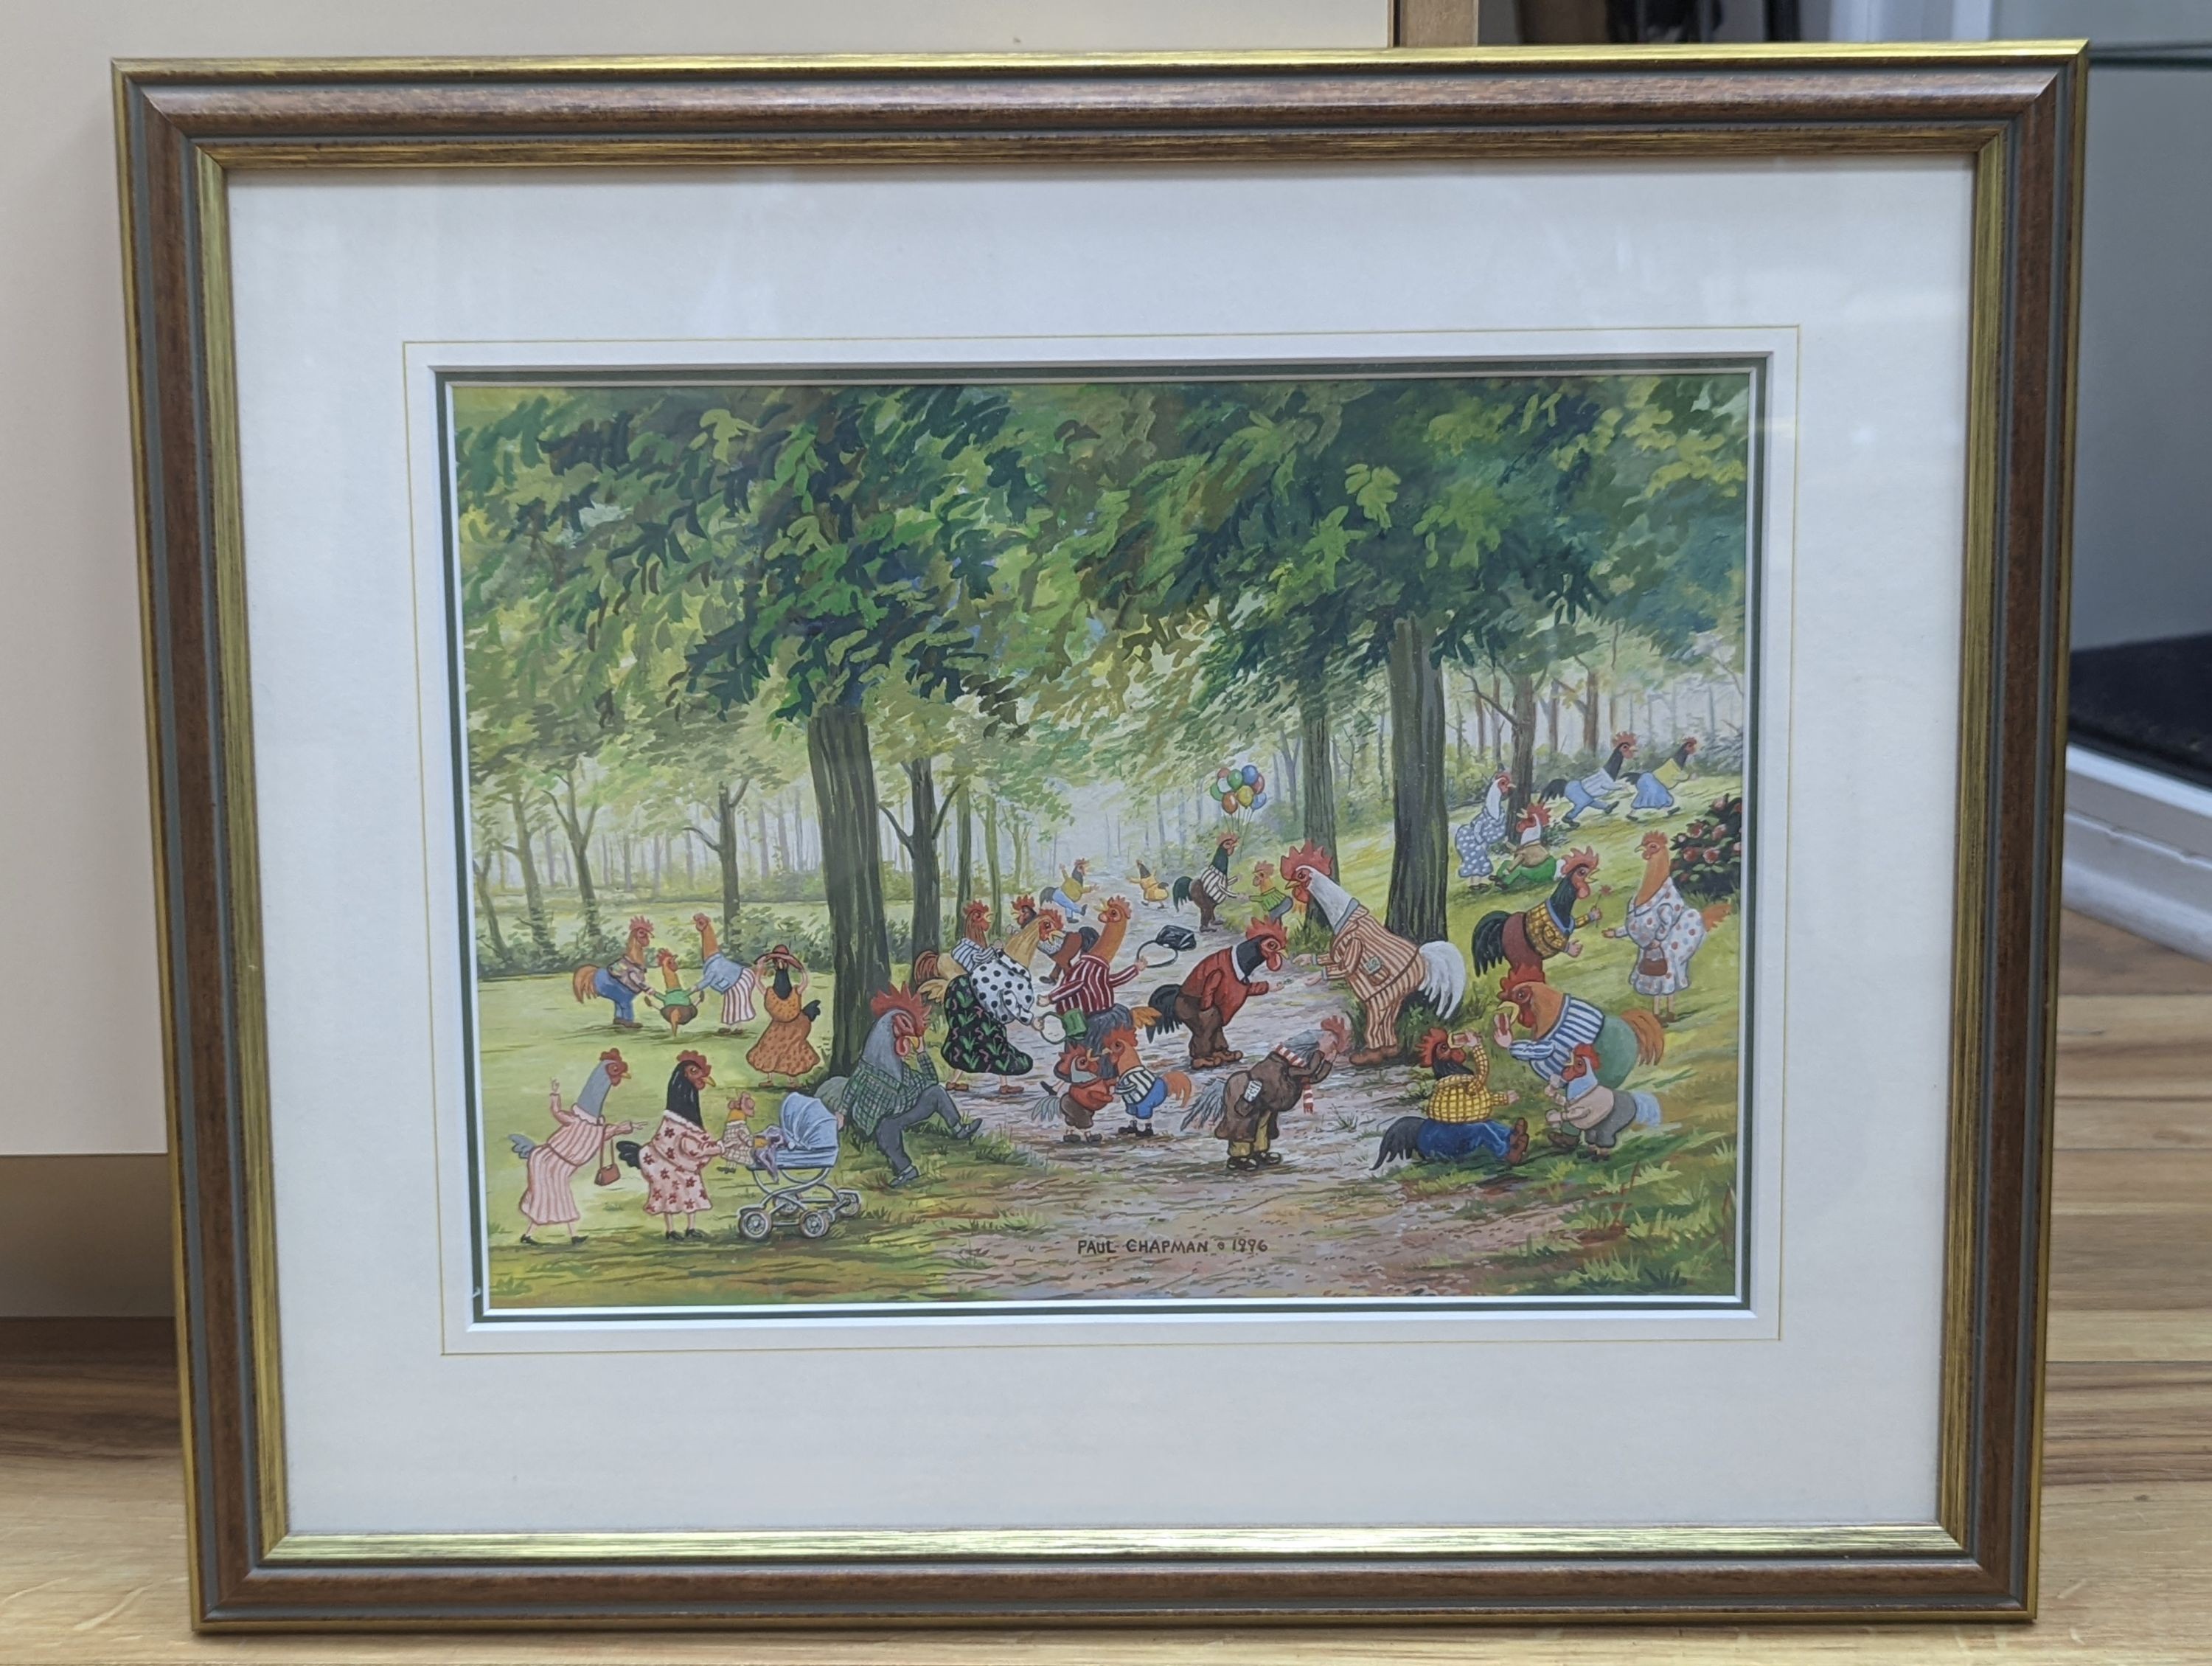 Paul Chapman, gouache, Park scene with chickens, signed and dated 1996. 23x30cm